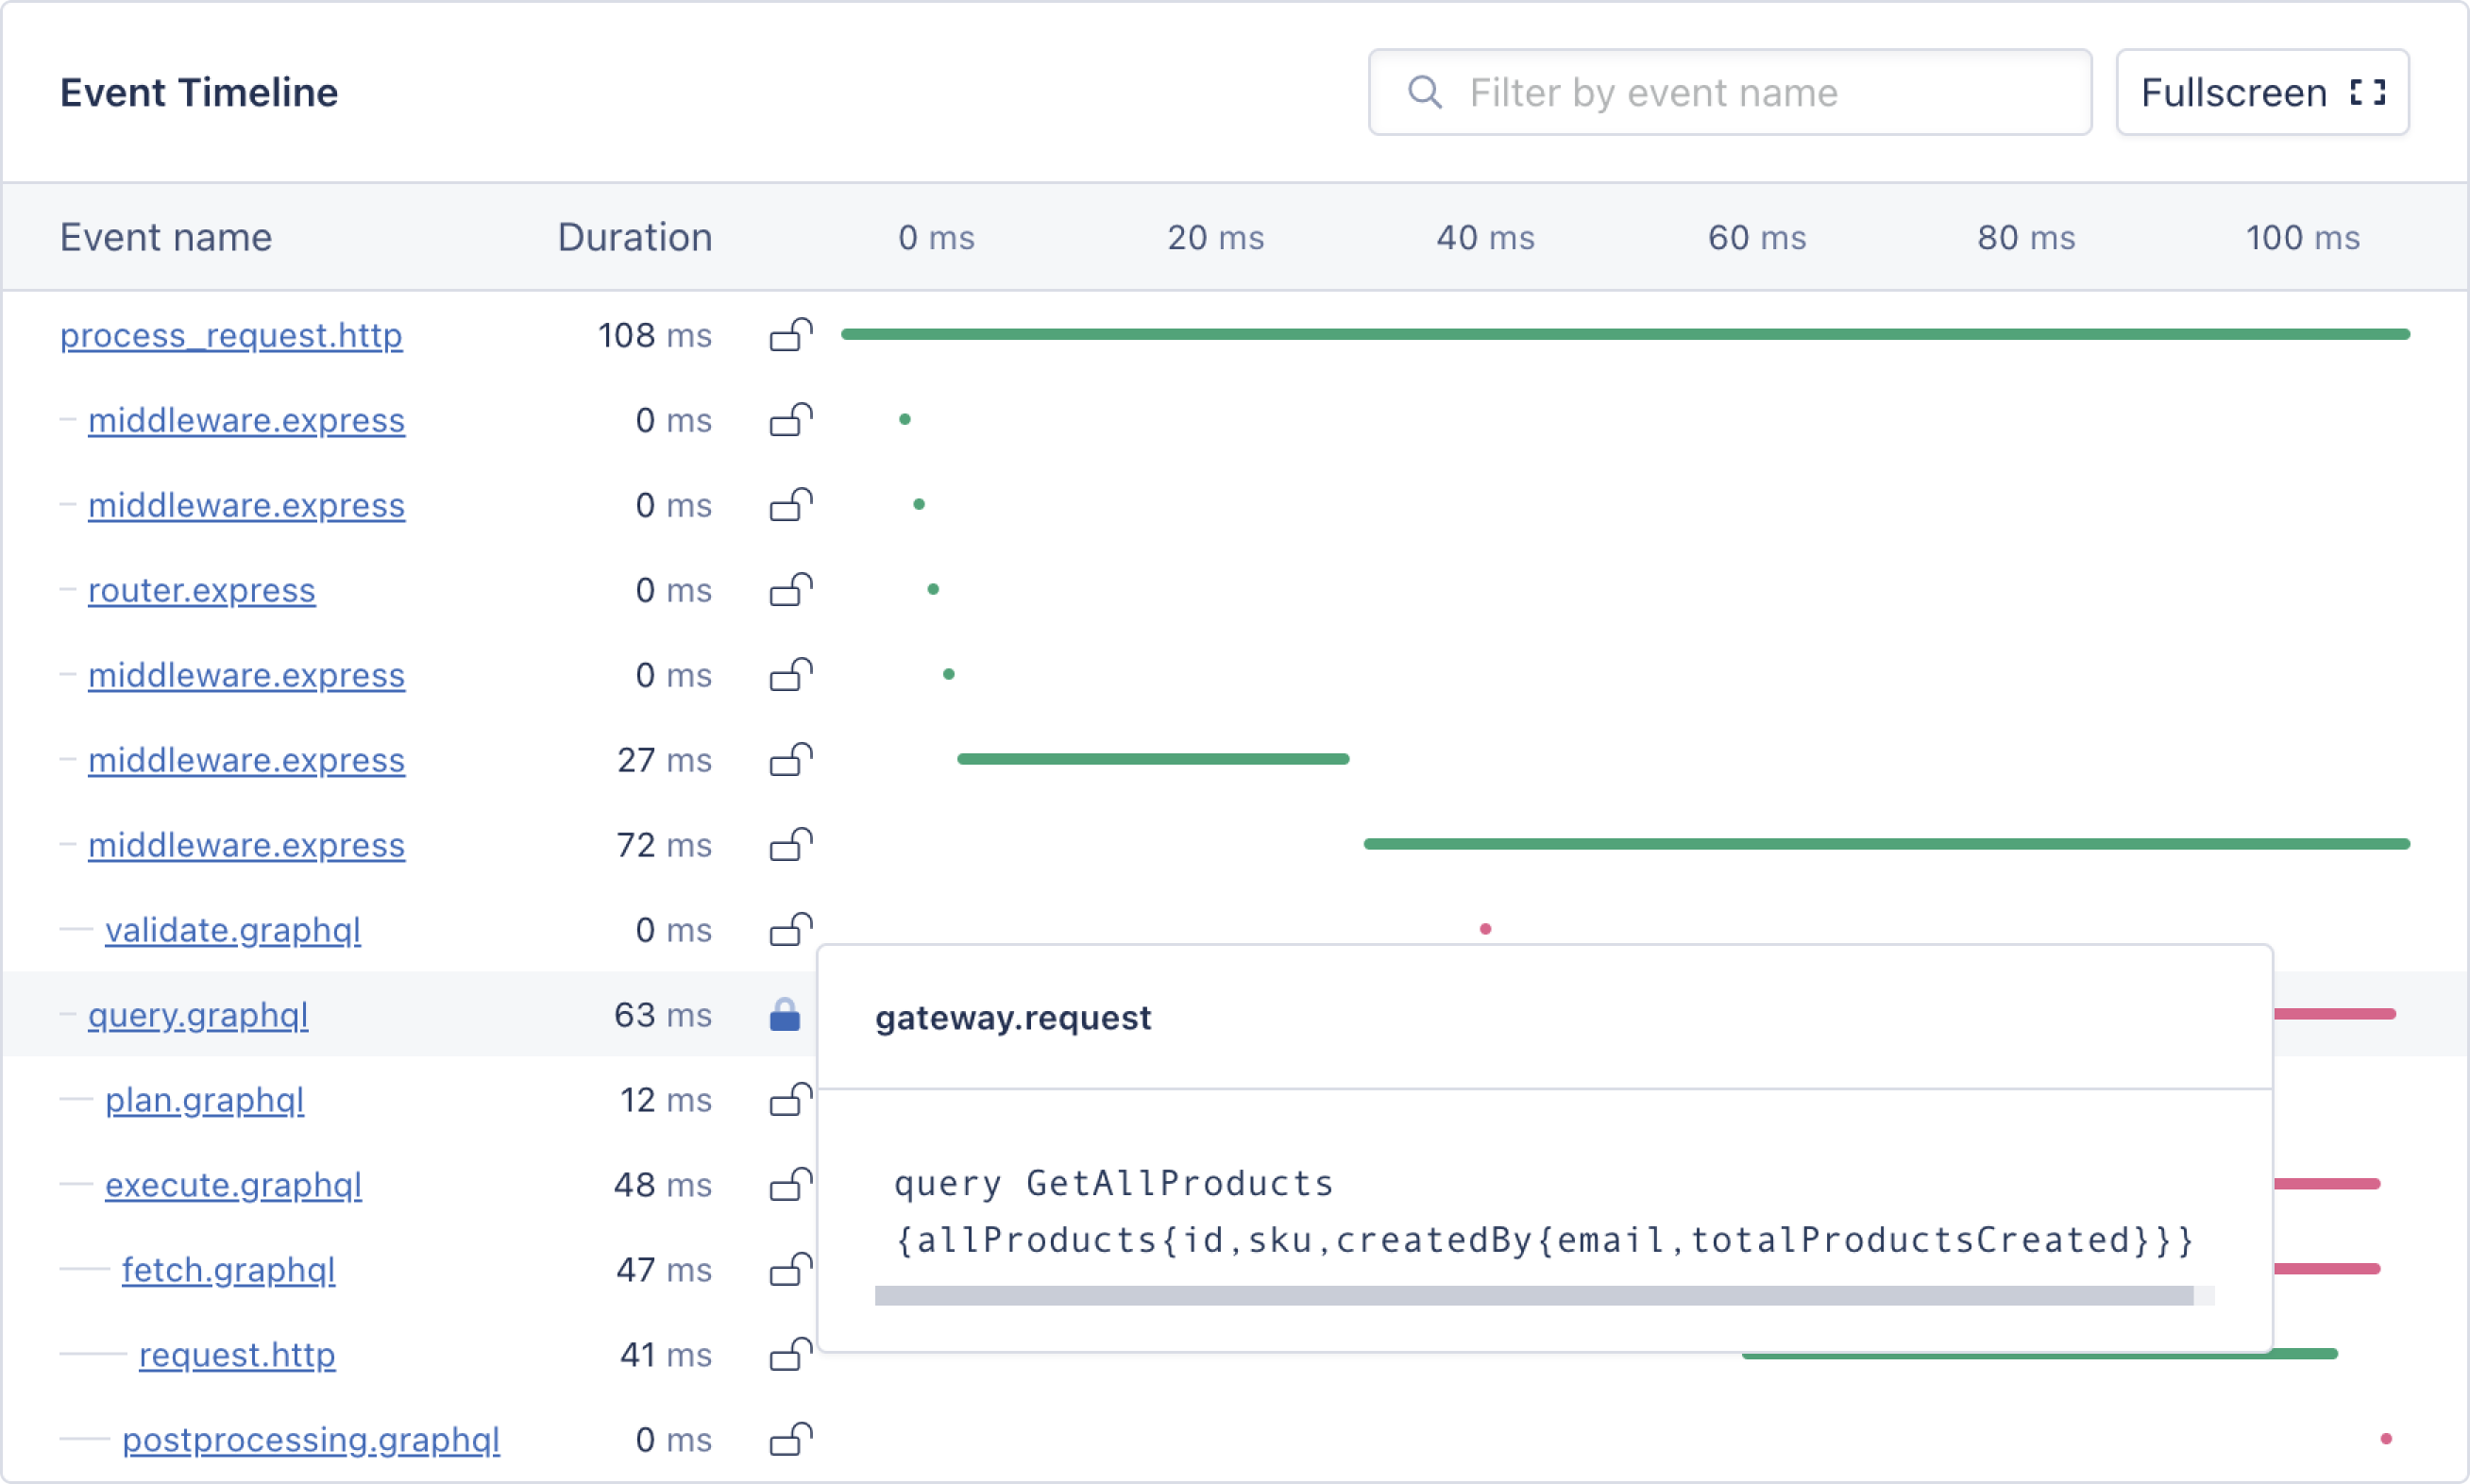 Screenshot of Event timeline showing gateway.request events